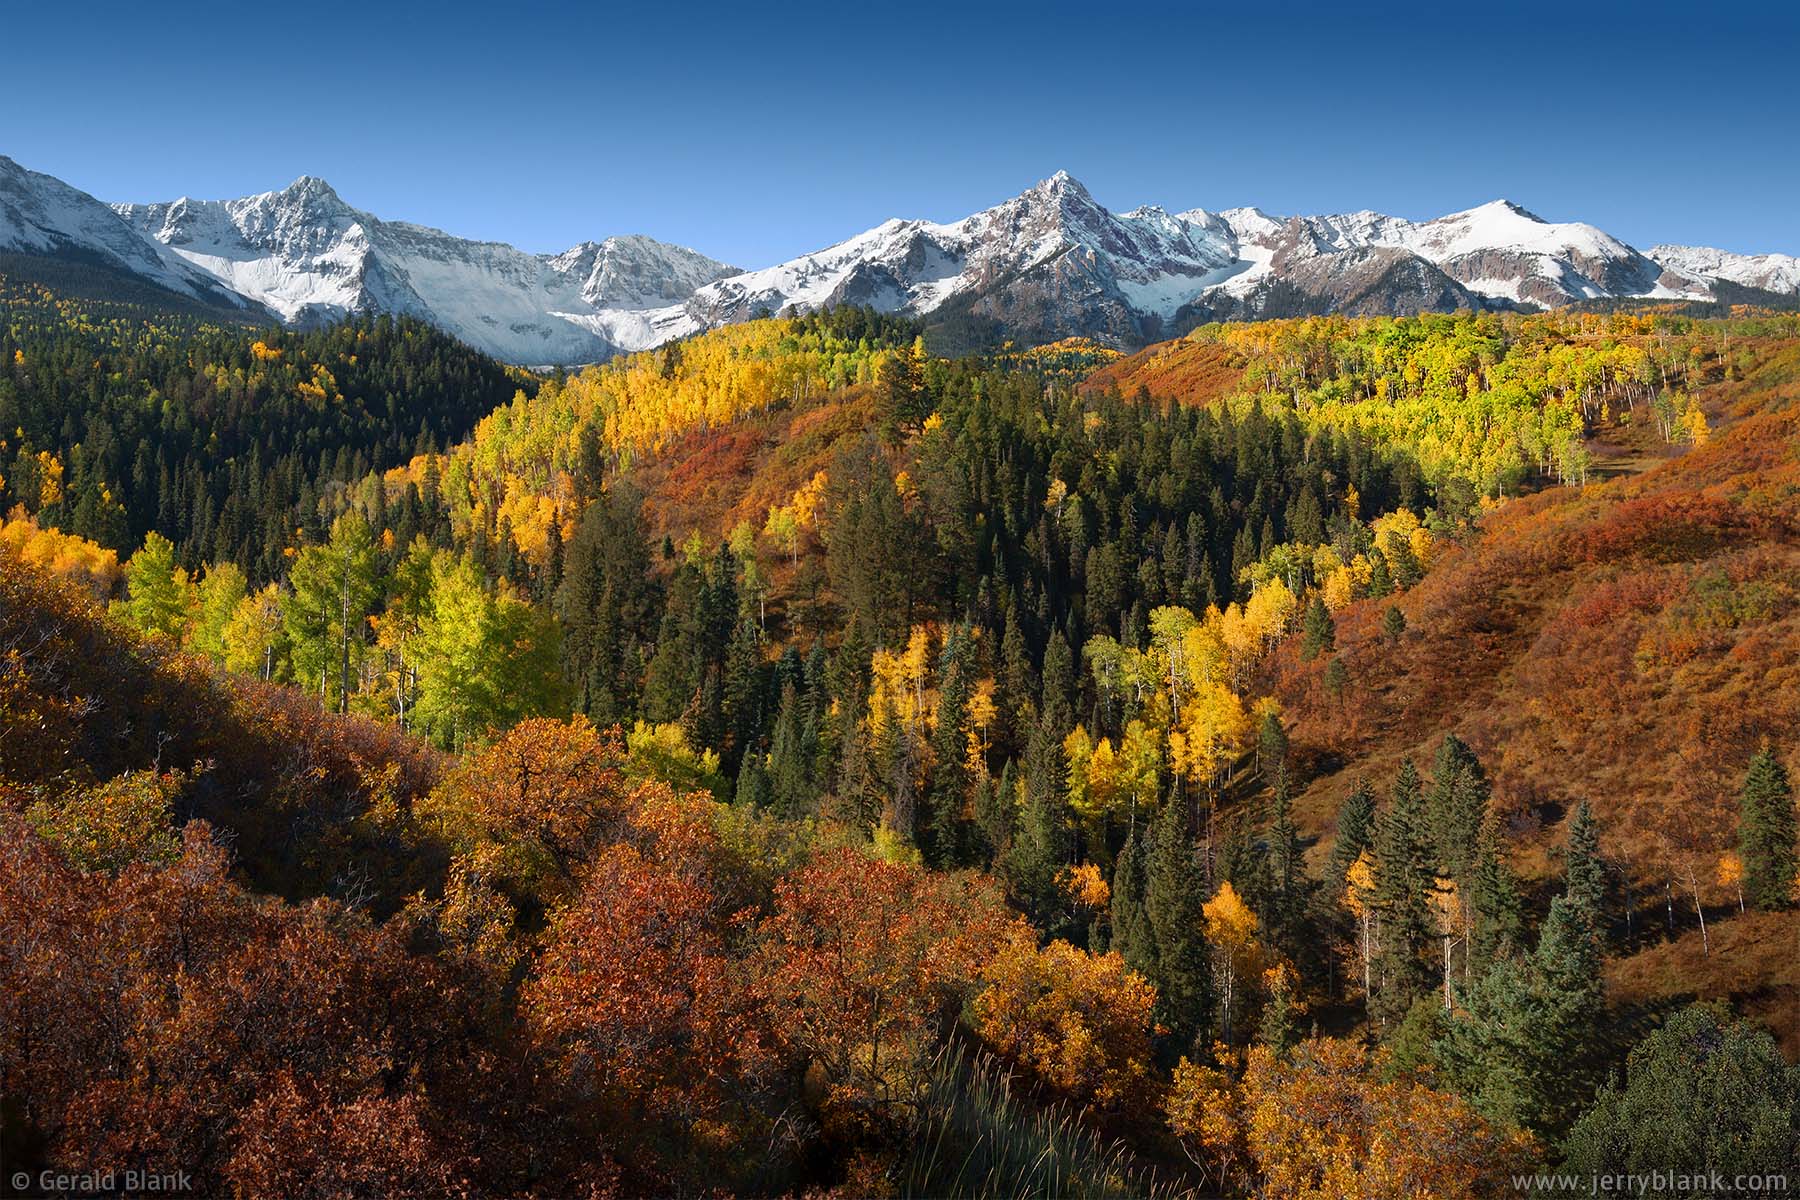 06737 - Autumn colors near Mears Peak and Ruffner Mountain, San Juan Mountains, Colorado - photo by Jerry Blank